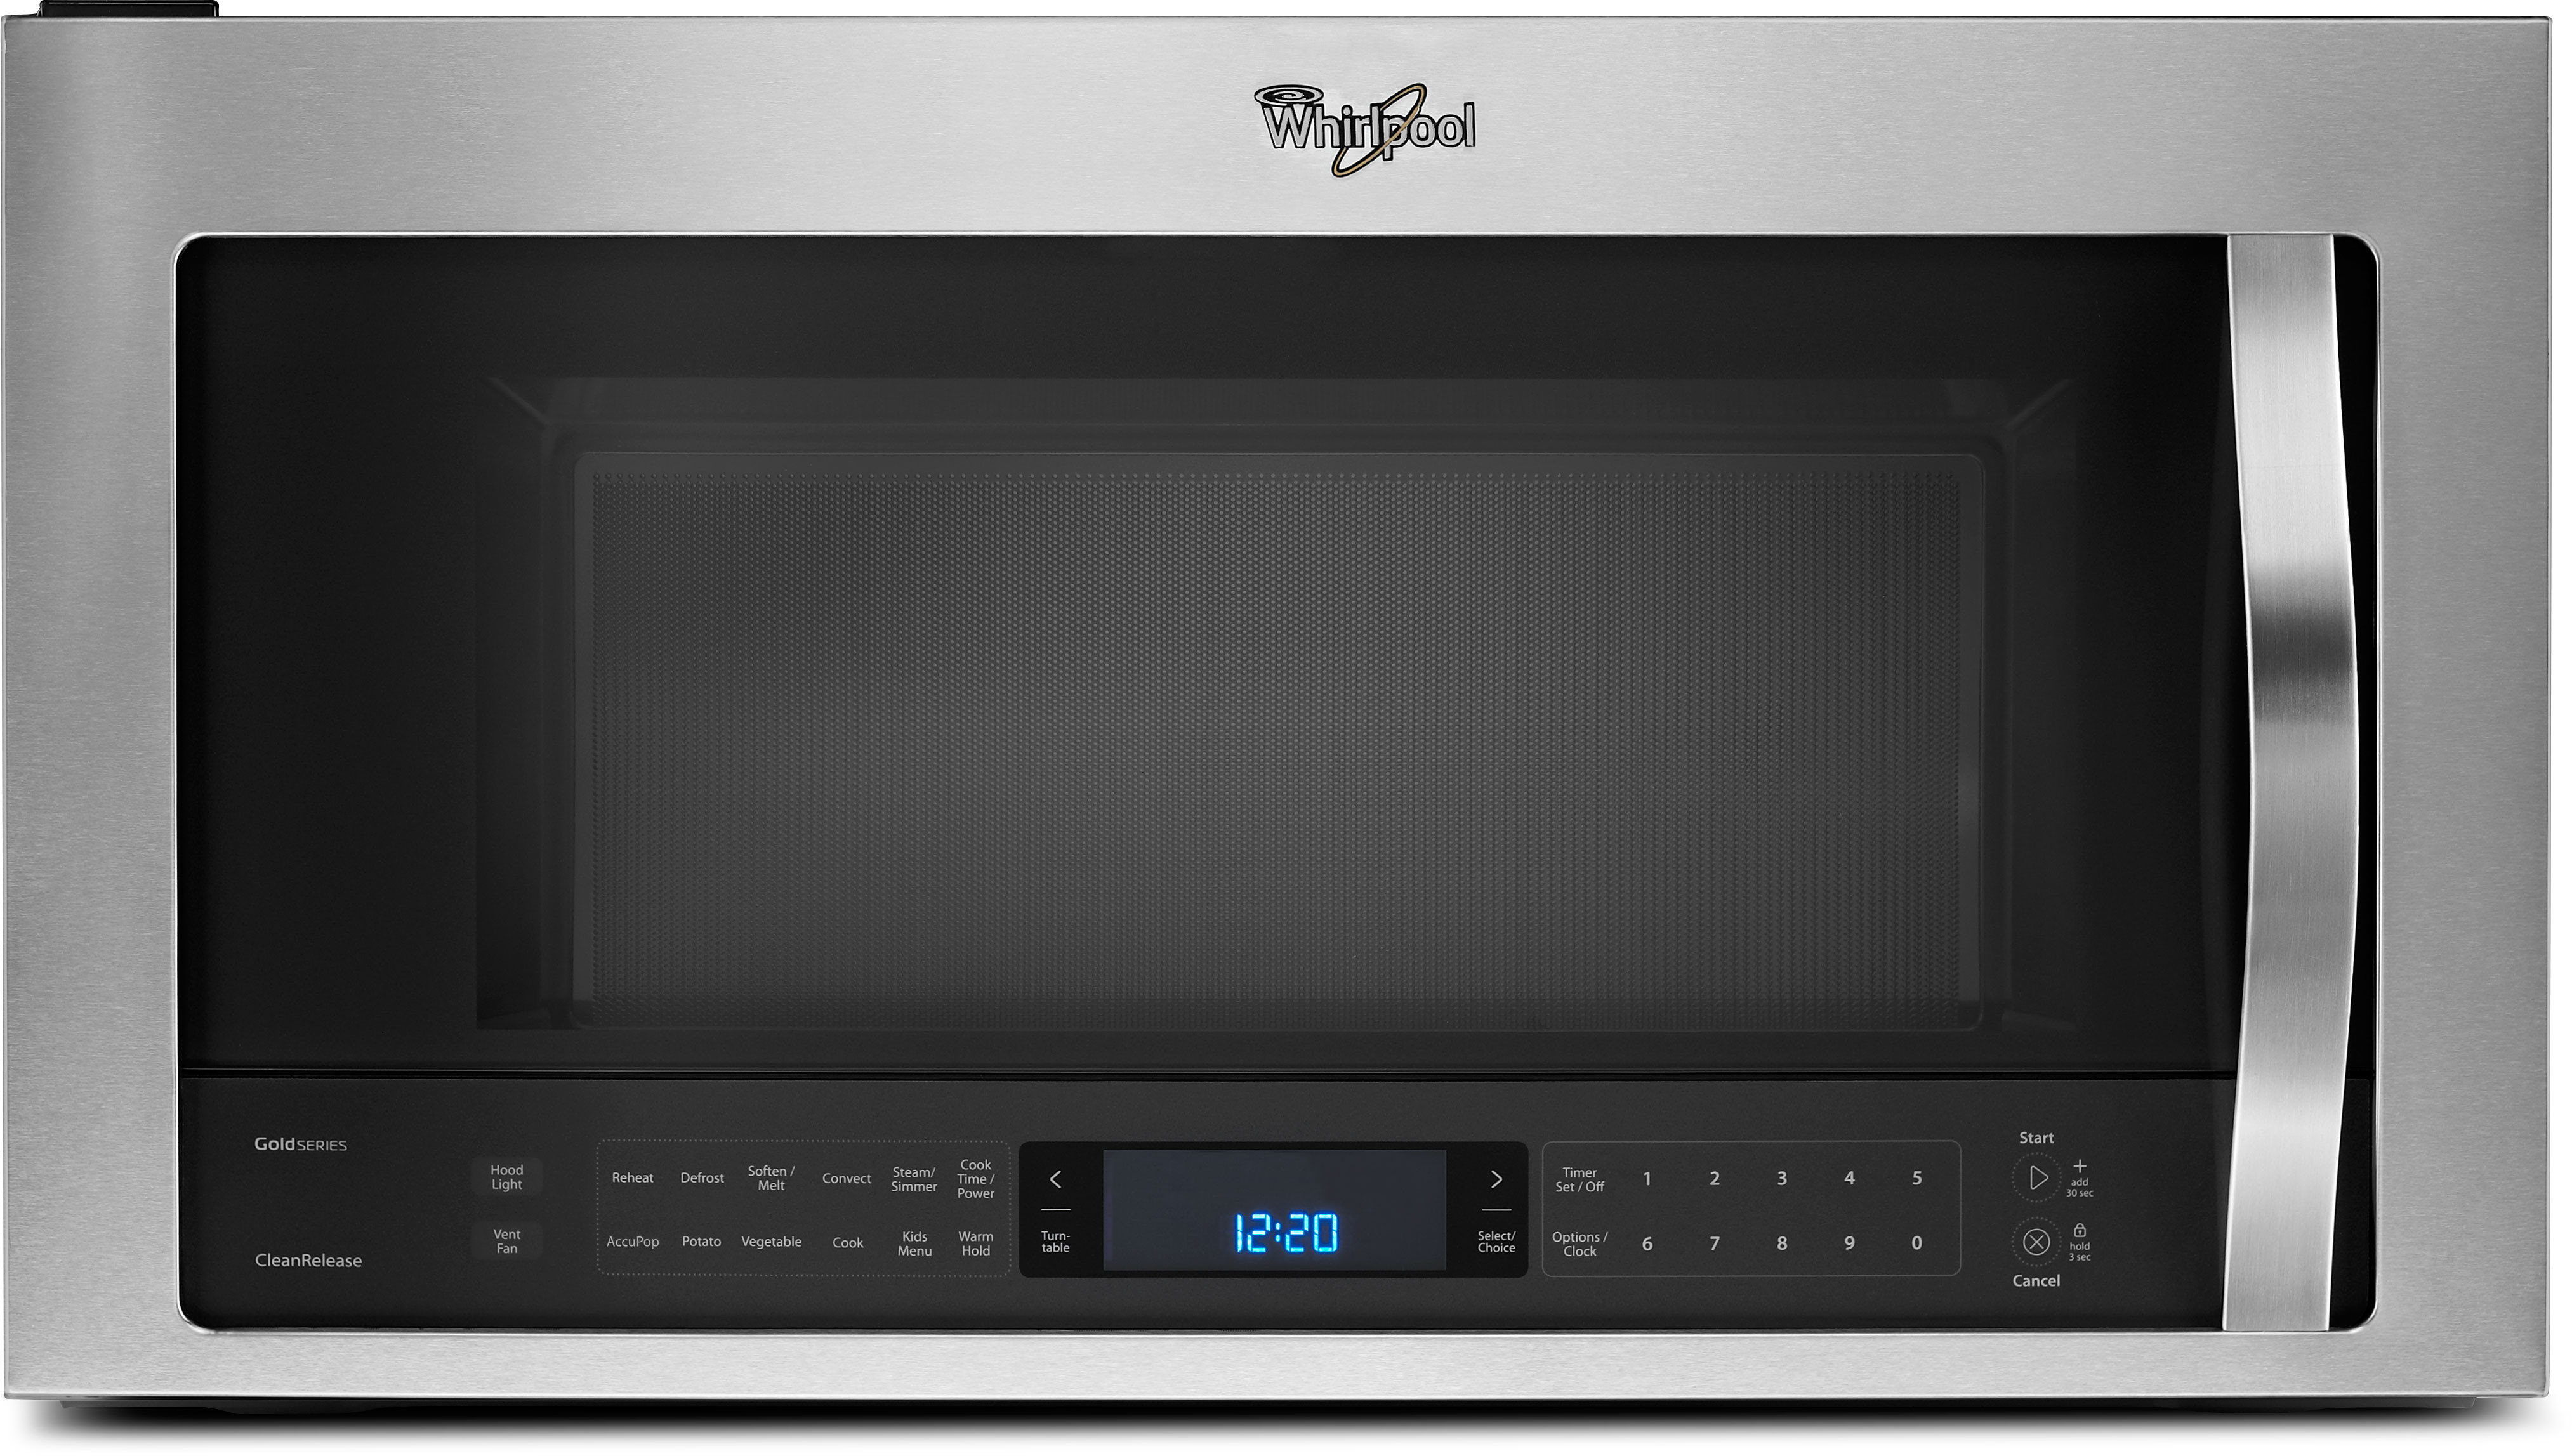 Whirlpool WMH76719CS 1.9 cu. ft. Over-the-Range Microwave Oven with 400